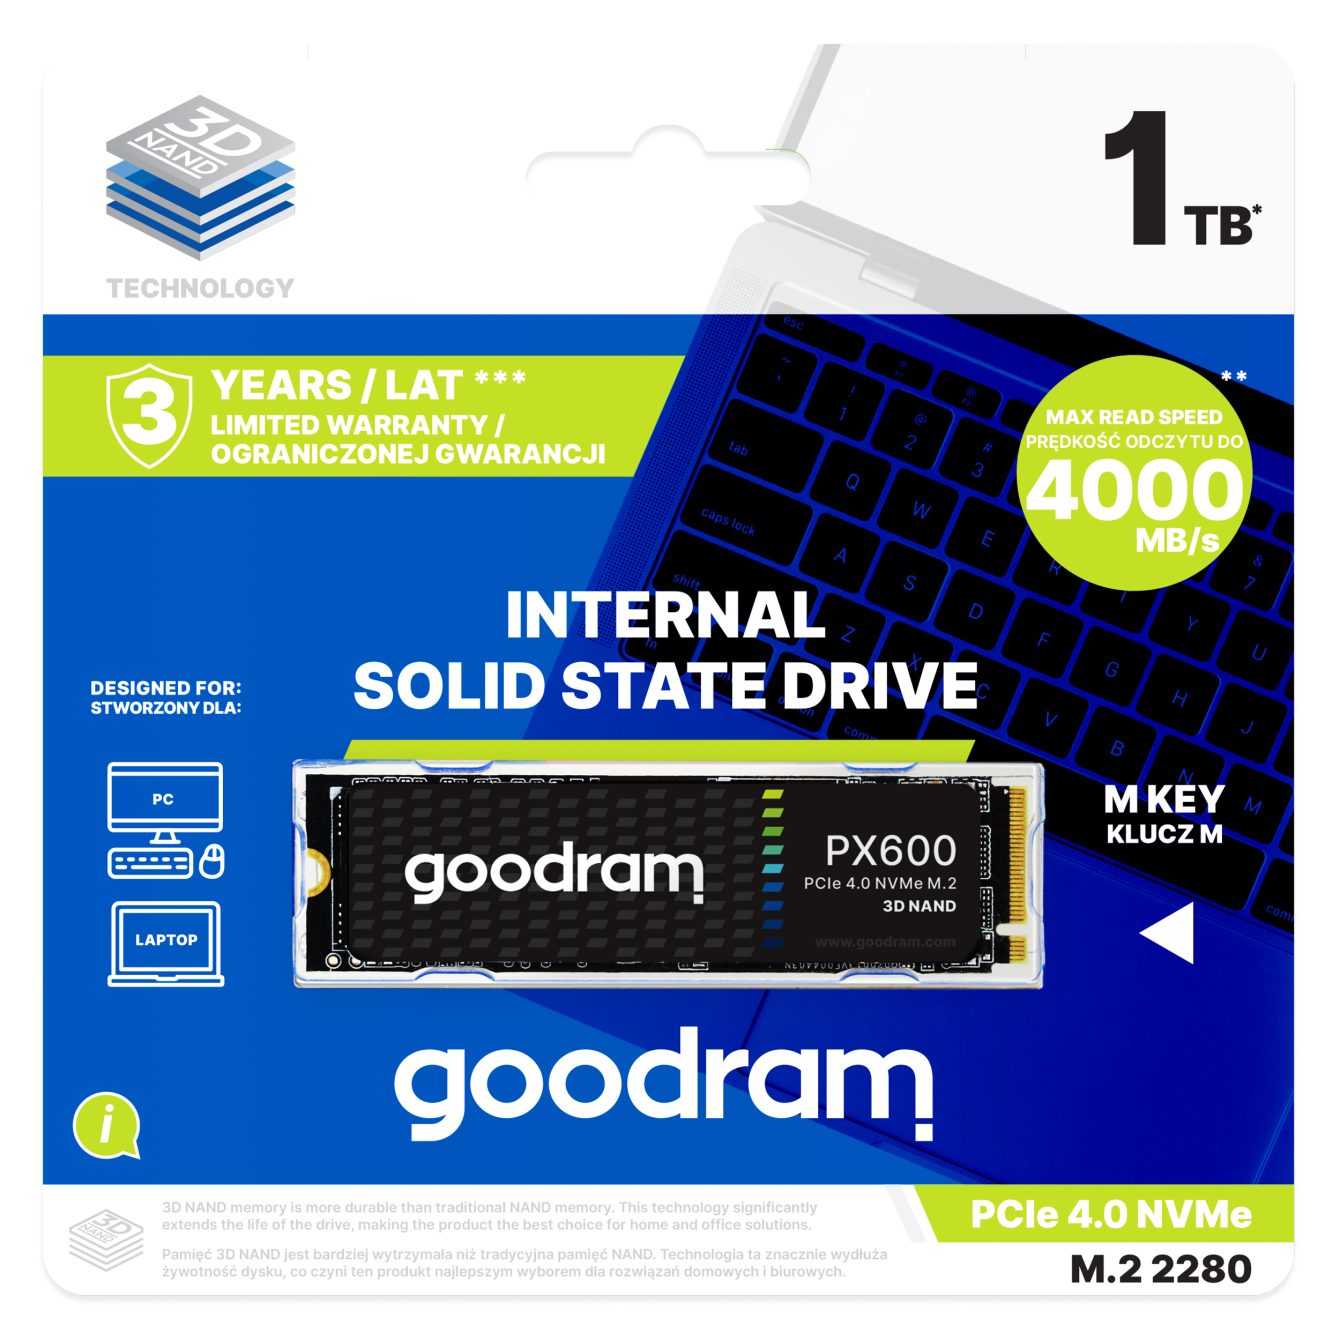 Introducing the all new Goodram PX600 SSDs